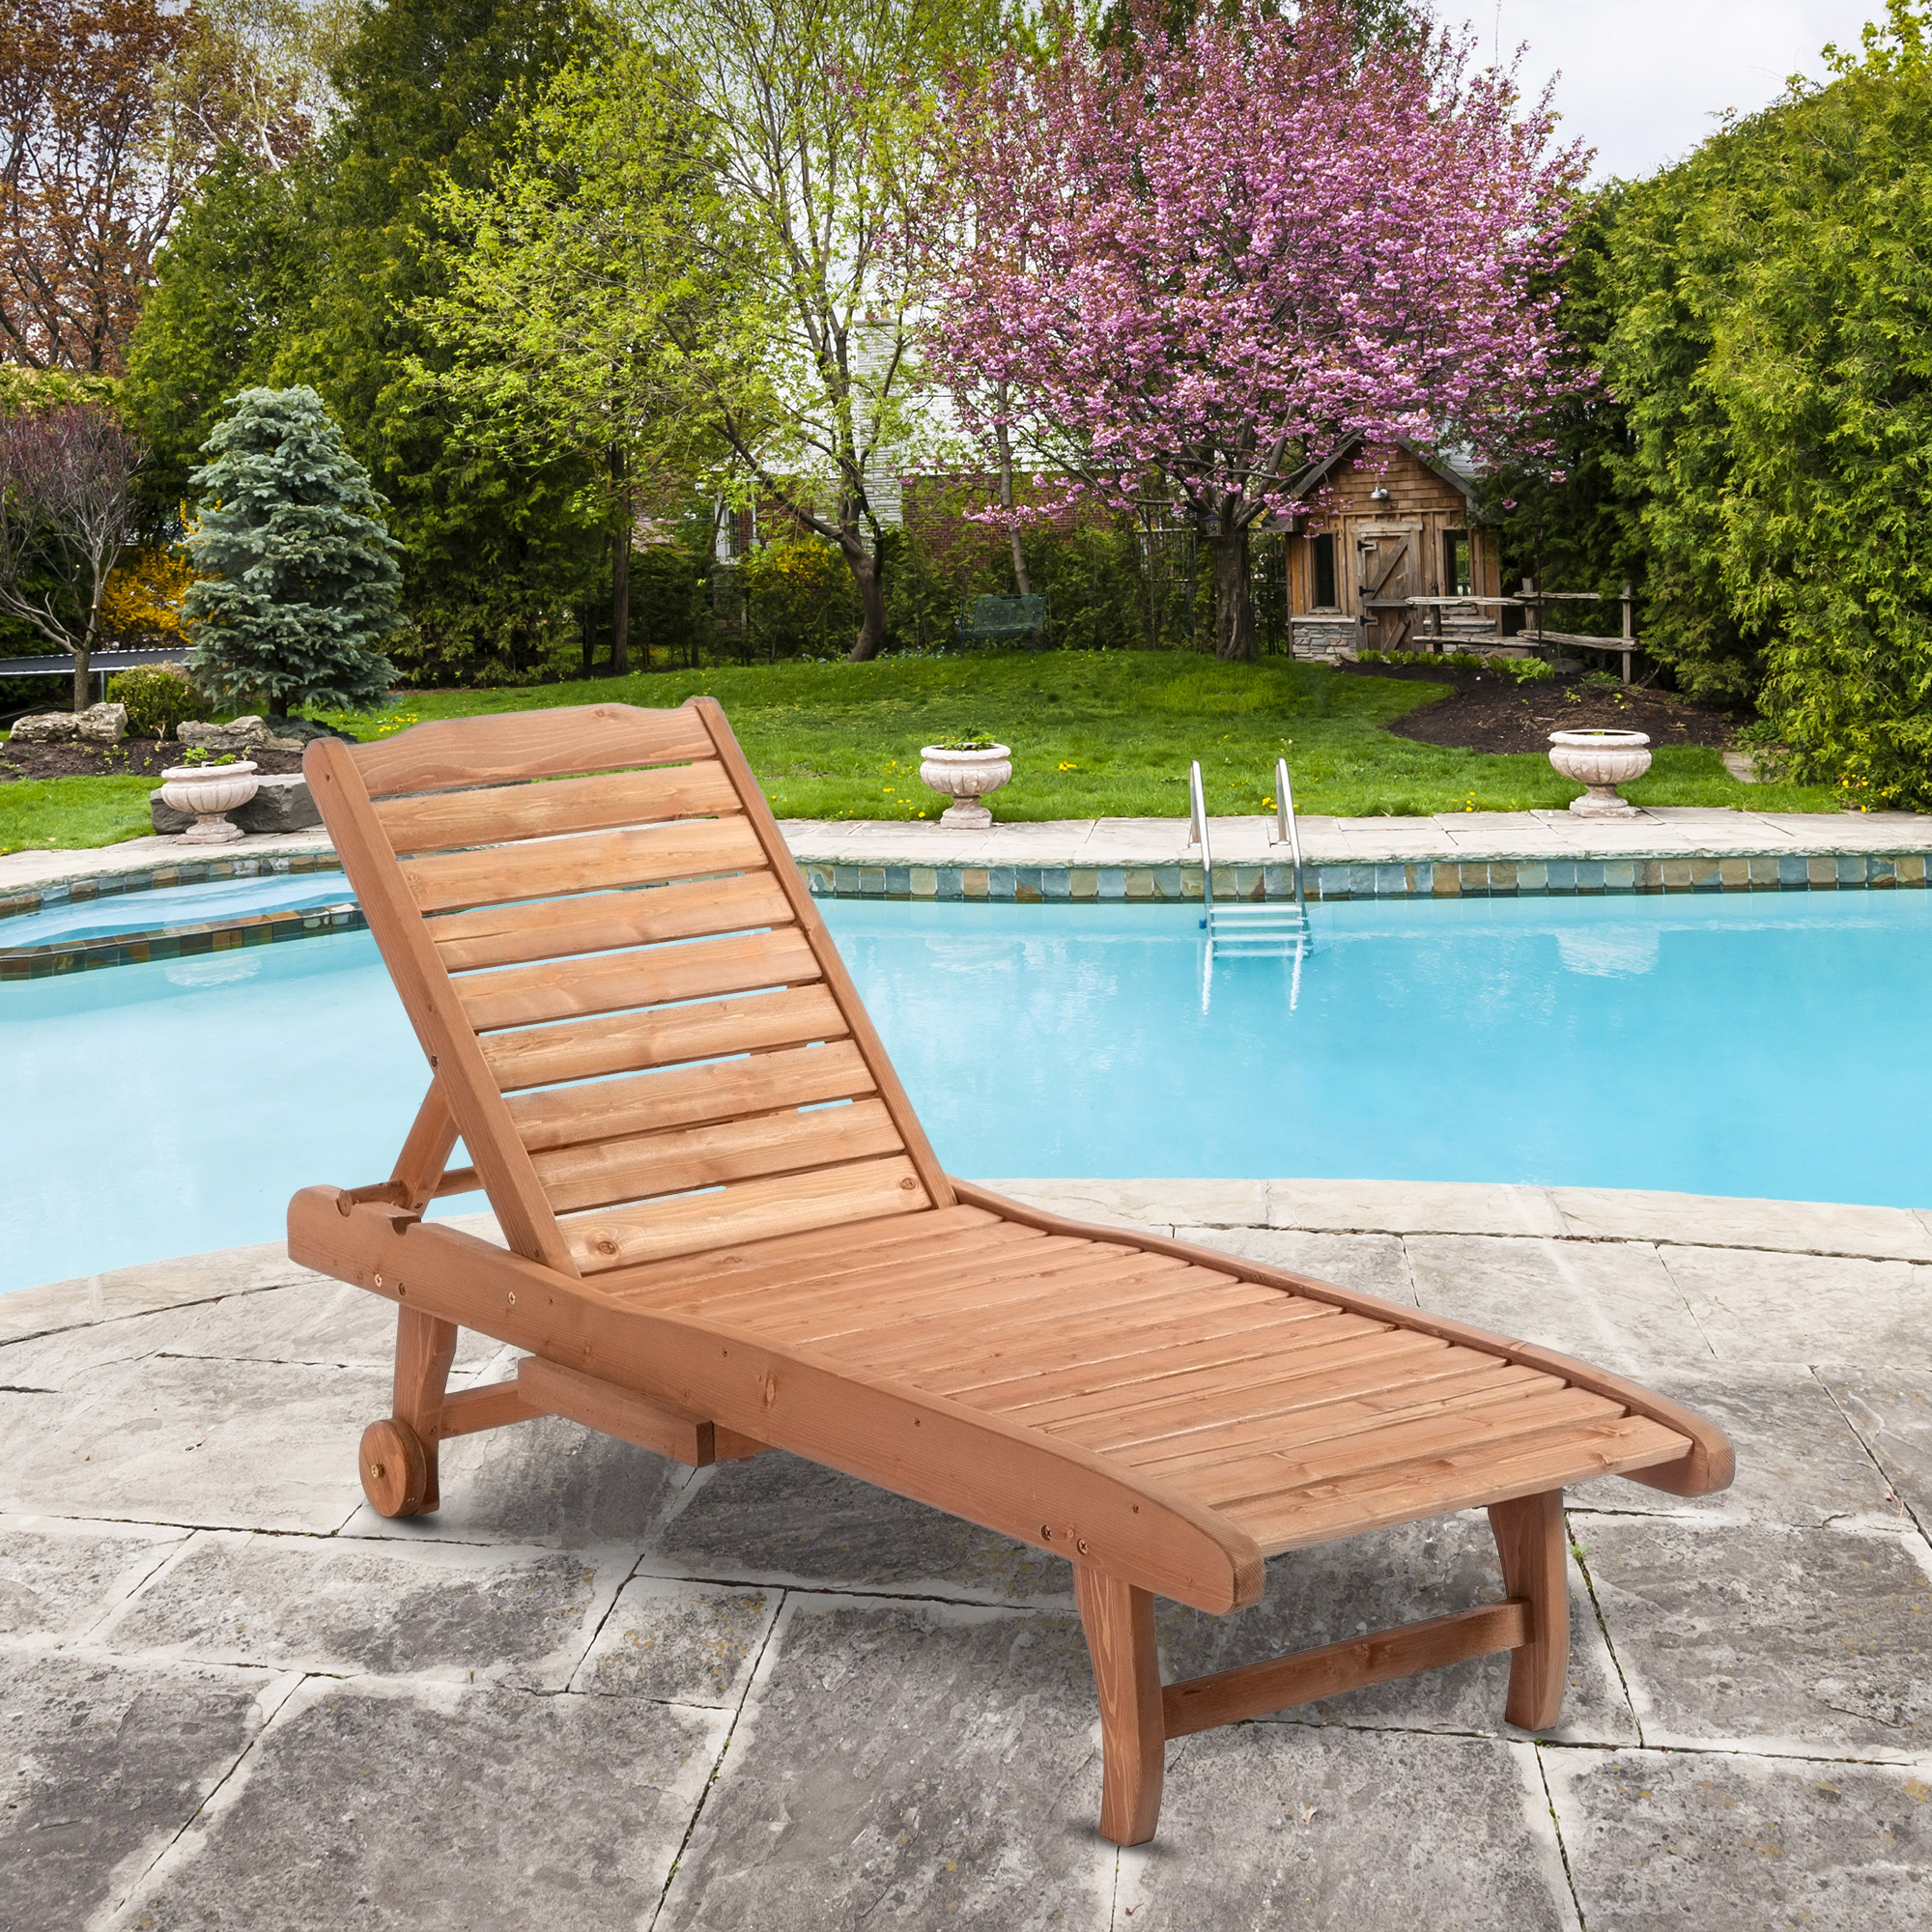 Outsunny Reclining Wood Outdoor Chaise Lounge - Brown - image 2 of 8